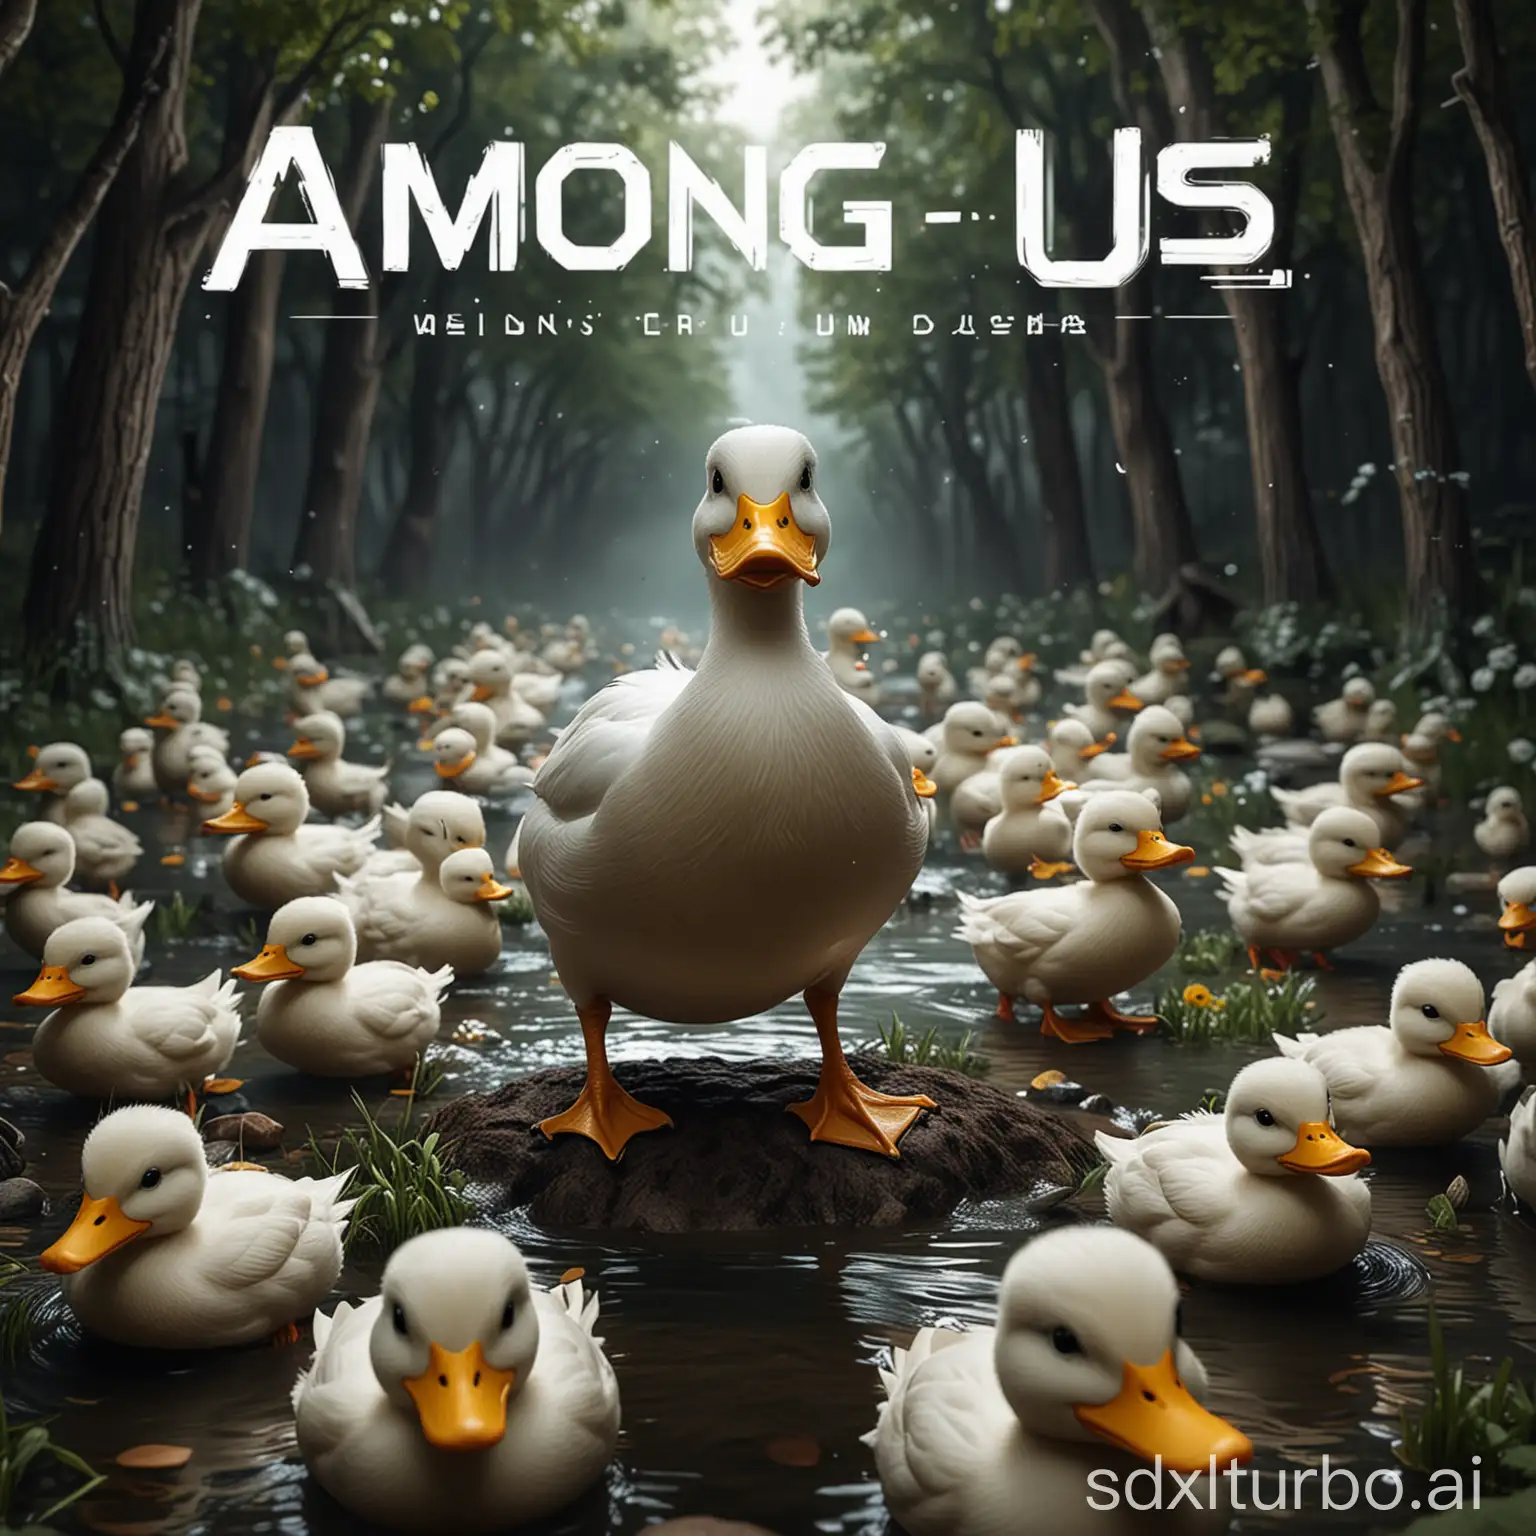 ((among us)) game with ducks, detailed, epic, dynamic, beautiful, sexy